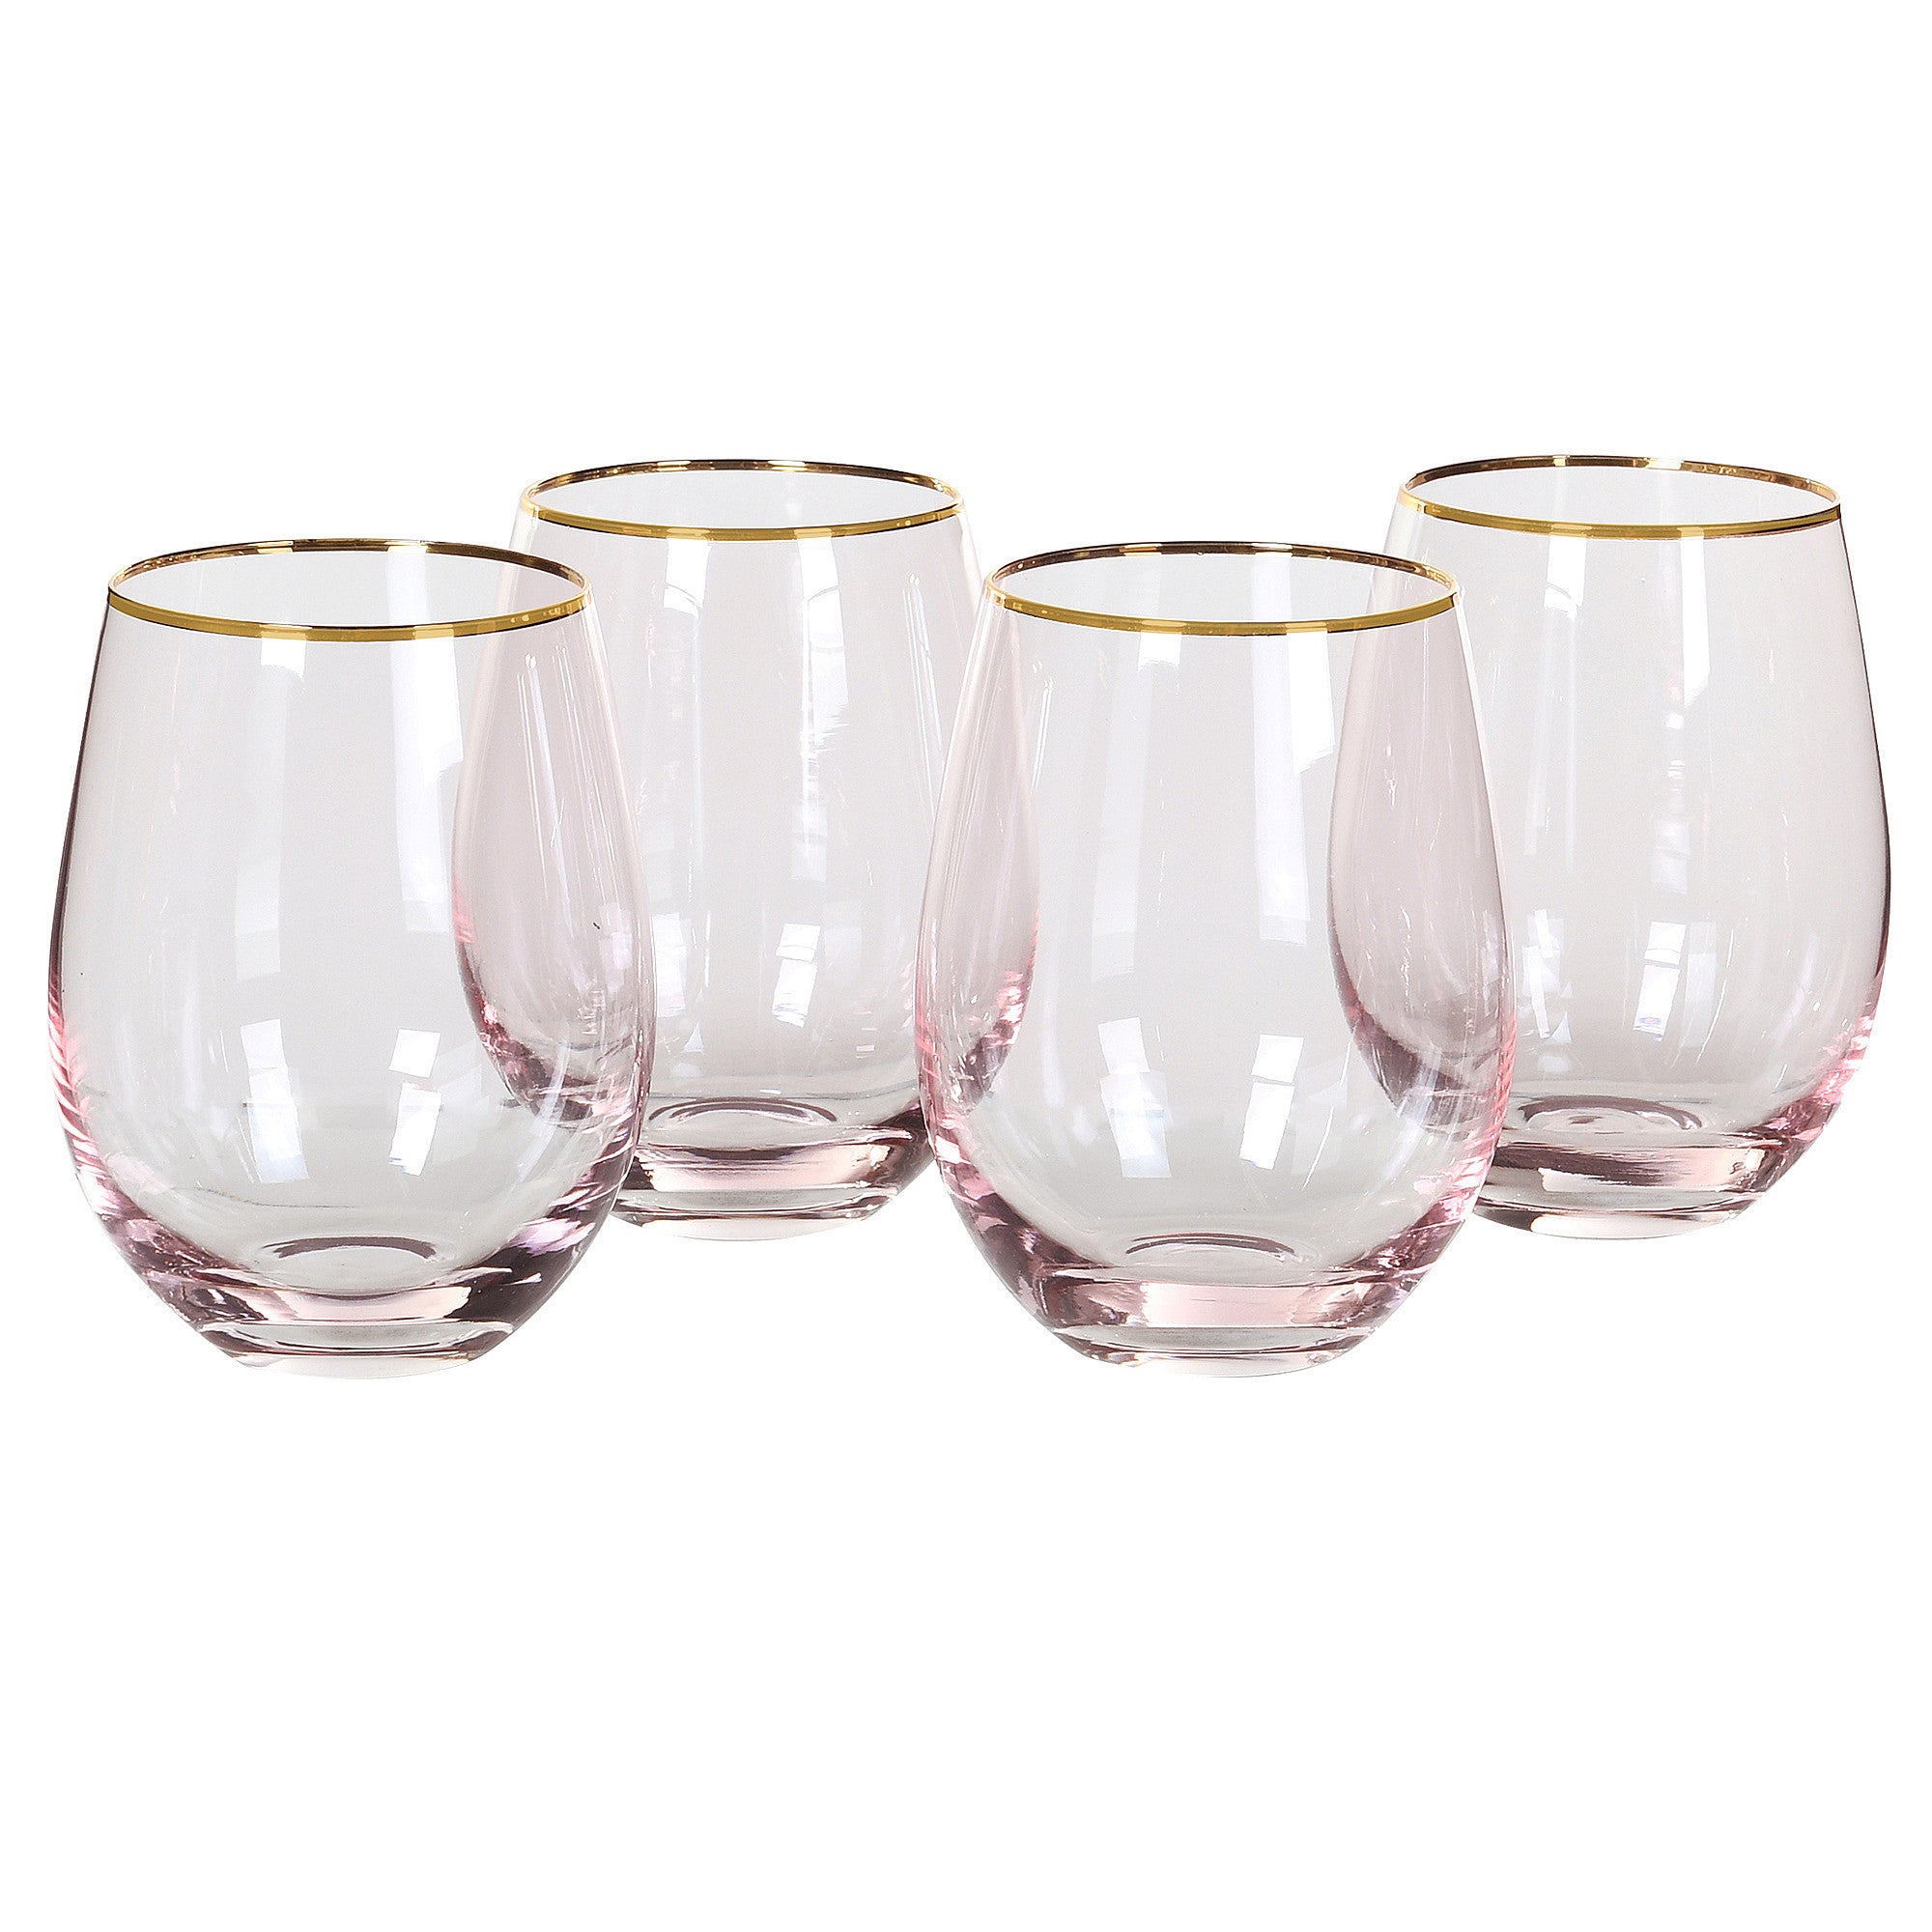 Pink Tumbler Glasses with Gold Rim | Set of 4